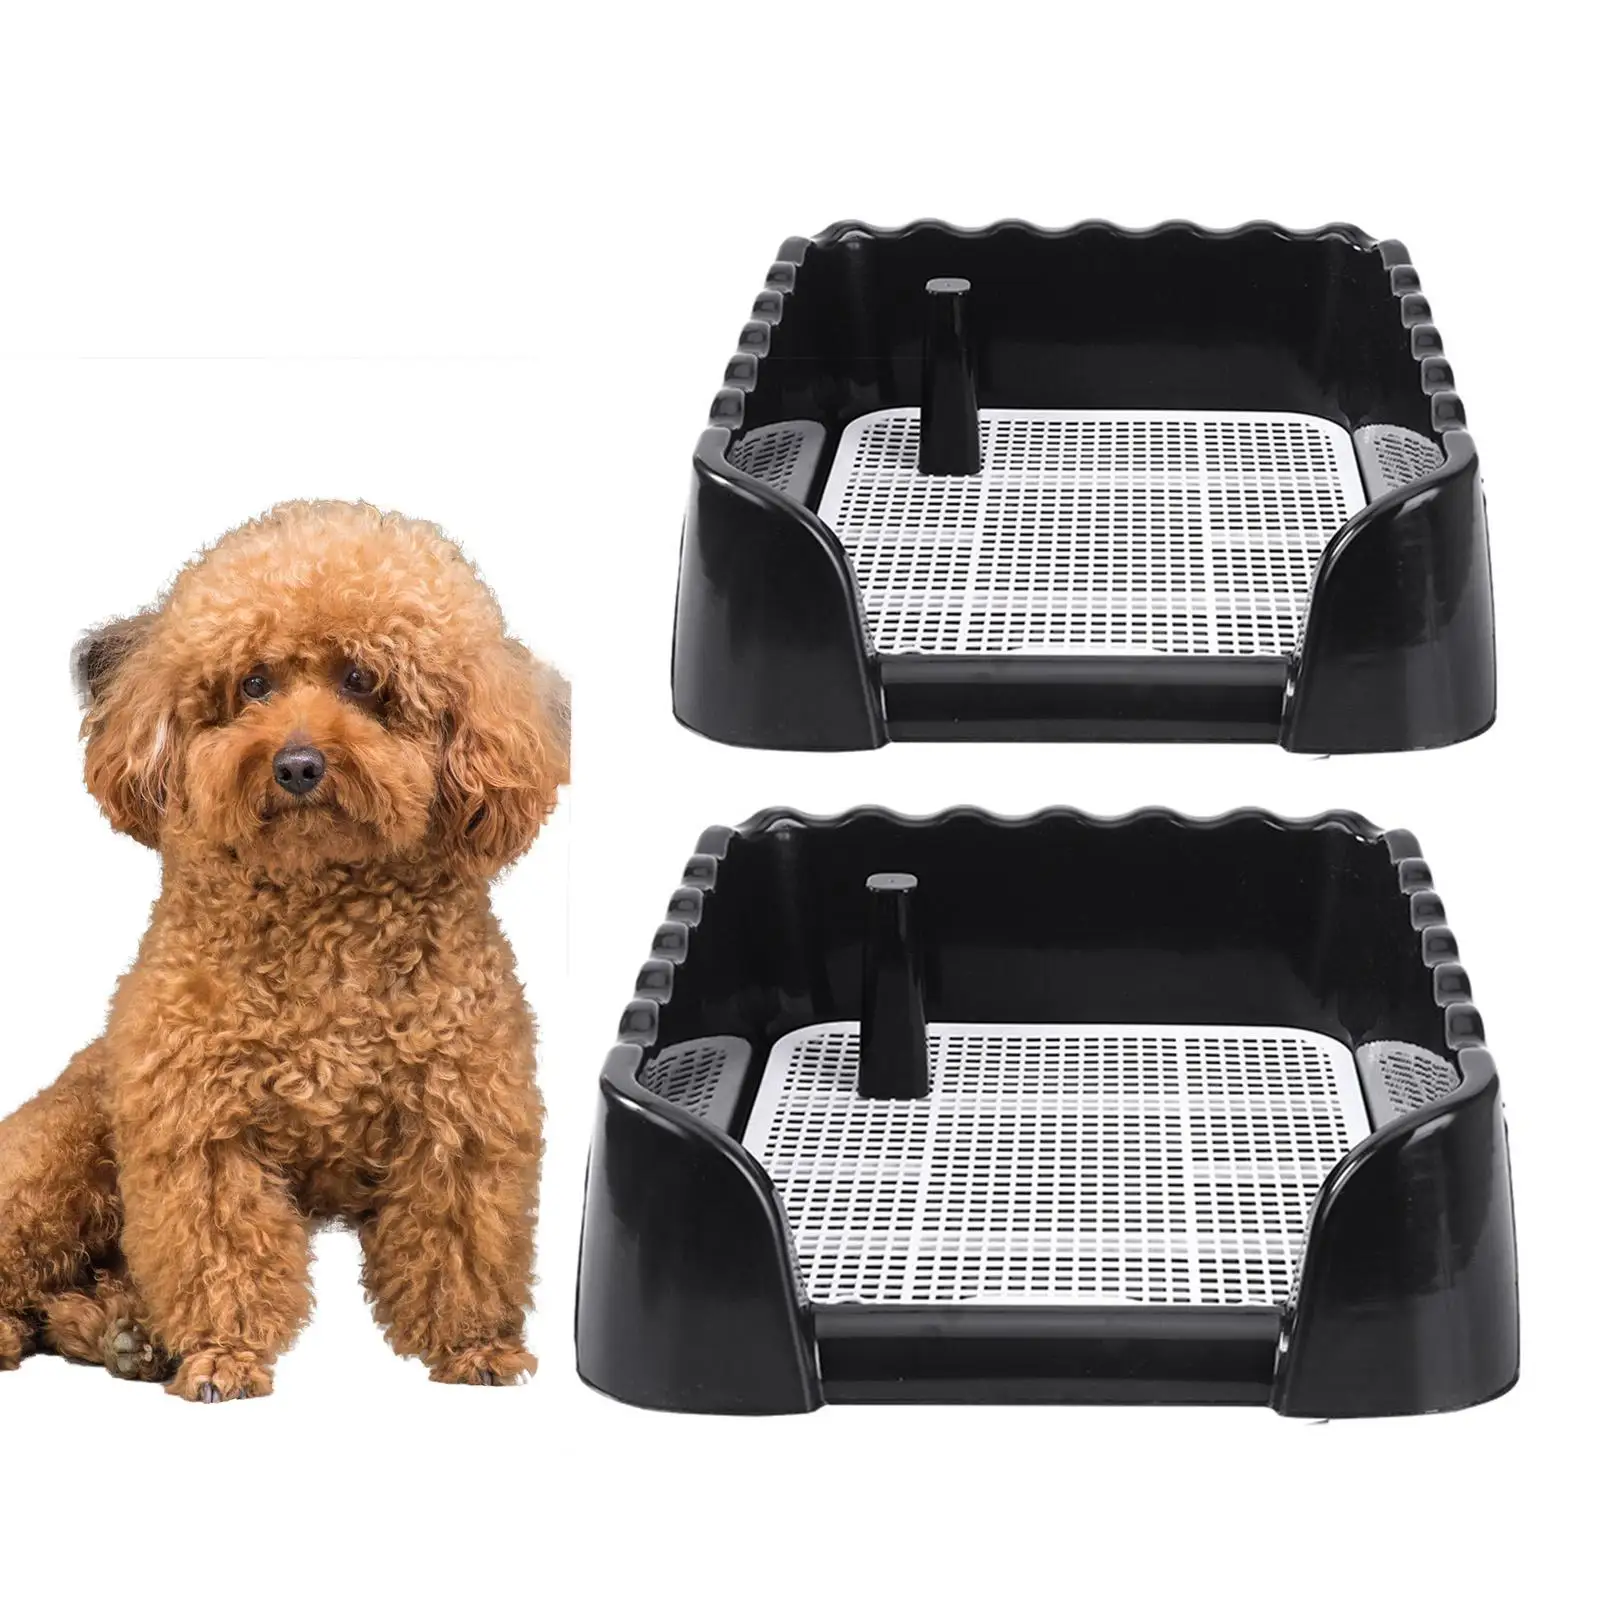 Pet Dog Toilet, Puppy Training Tray with Removable Post, Portable Cleaning Tool Urinal Lavatory Basin for Small Medium Dogs